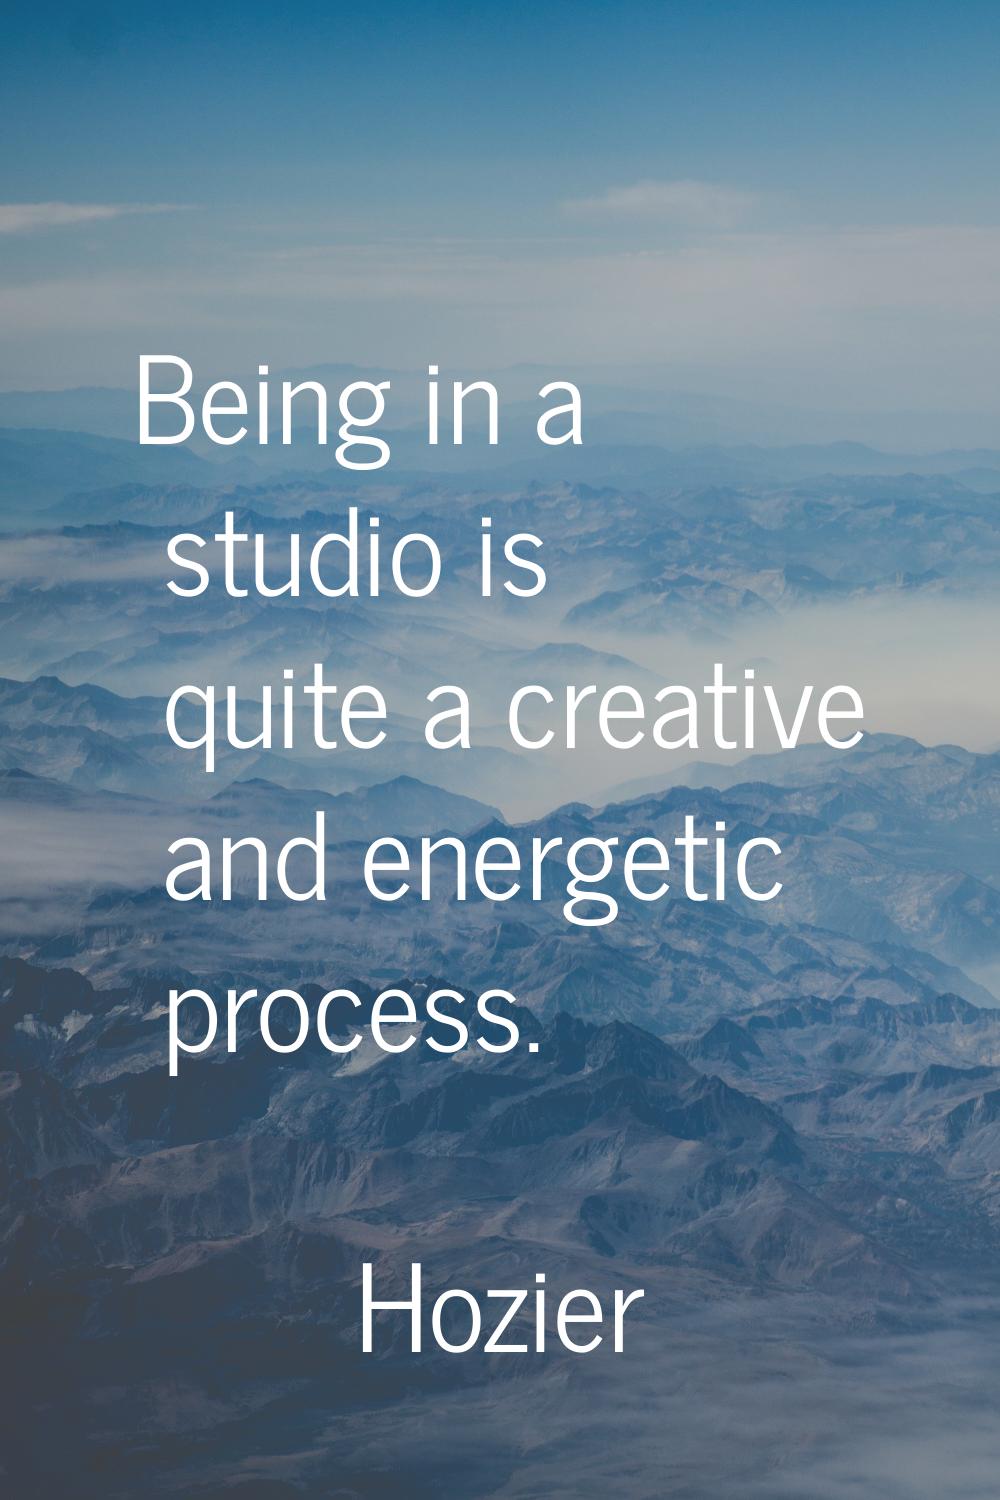 Being in a studio is quite a creative and energetic process.